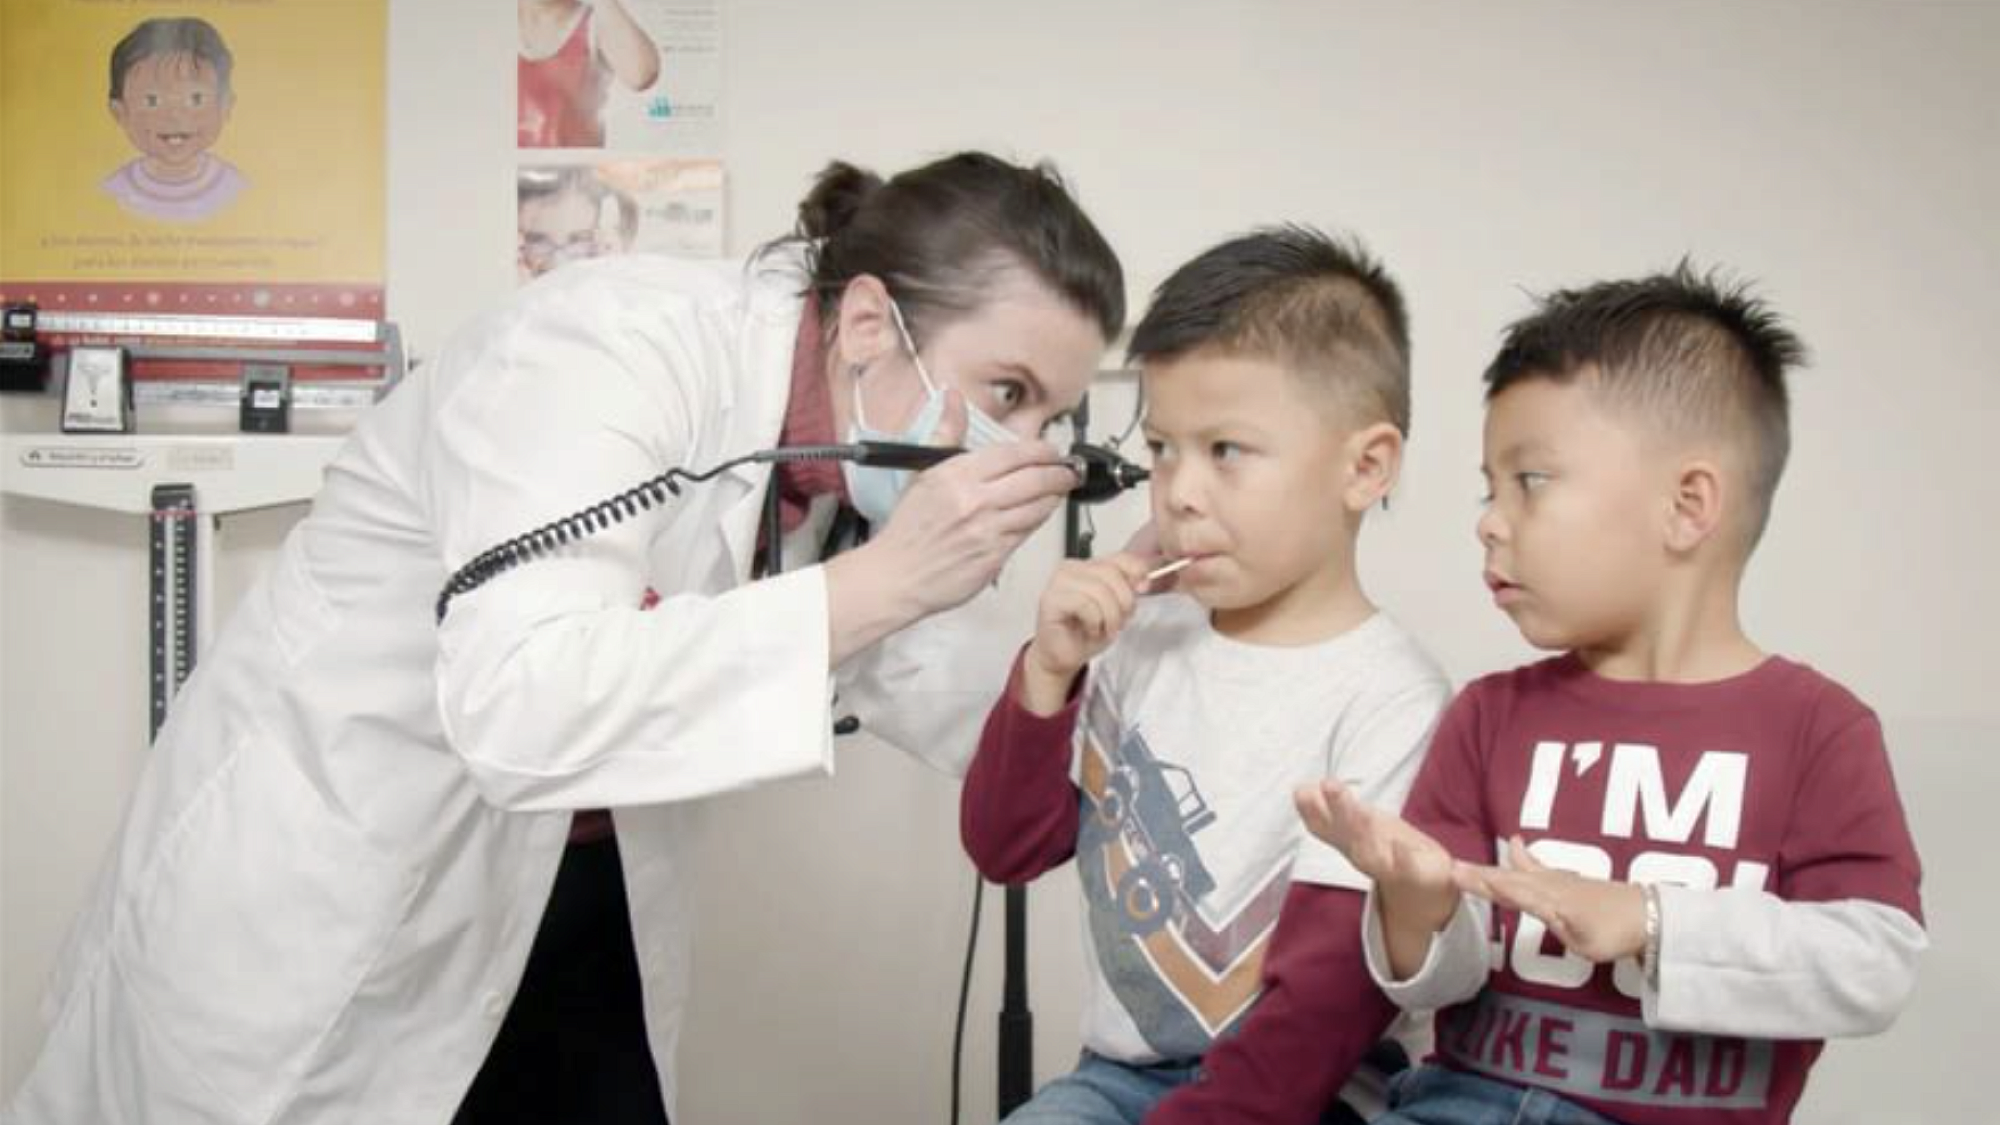 Christina Necessary, medical student at the Spencer Fox Eccles School of Medicine at the University of Utah, sees pediatric patients in the Midvale student-led clinic